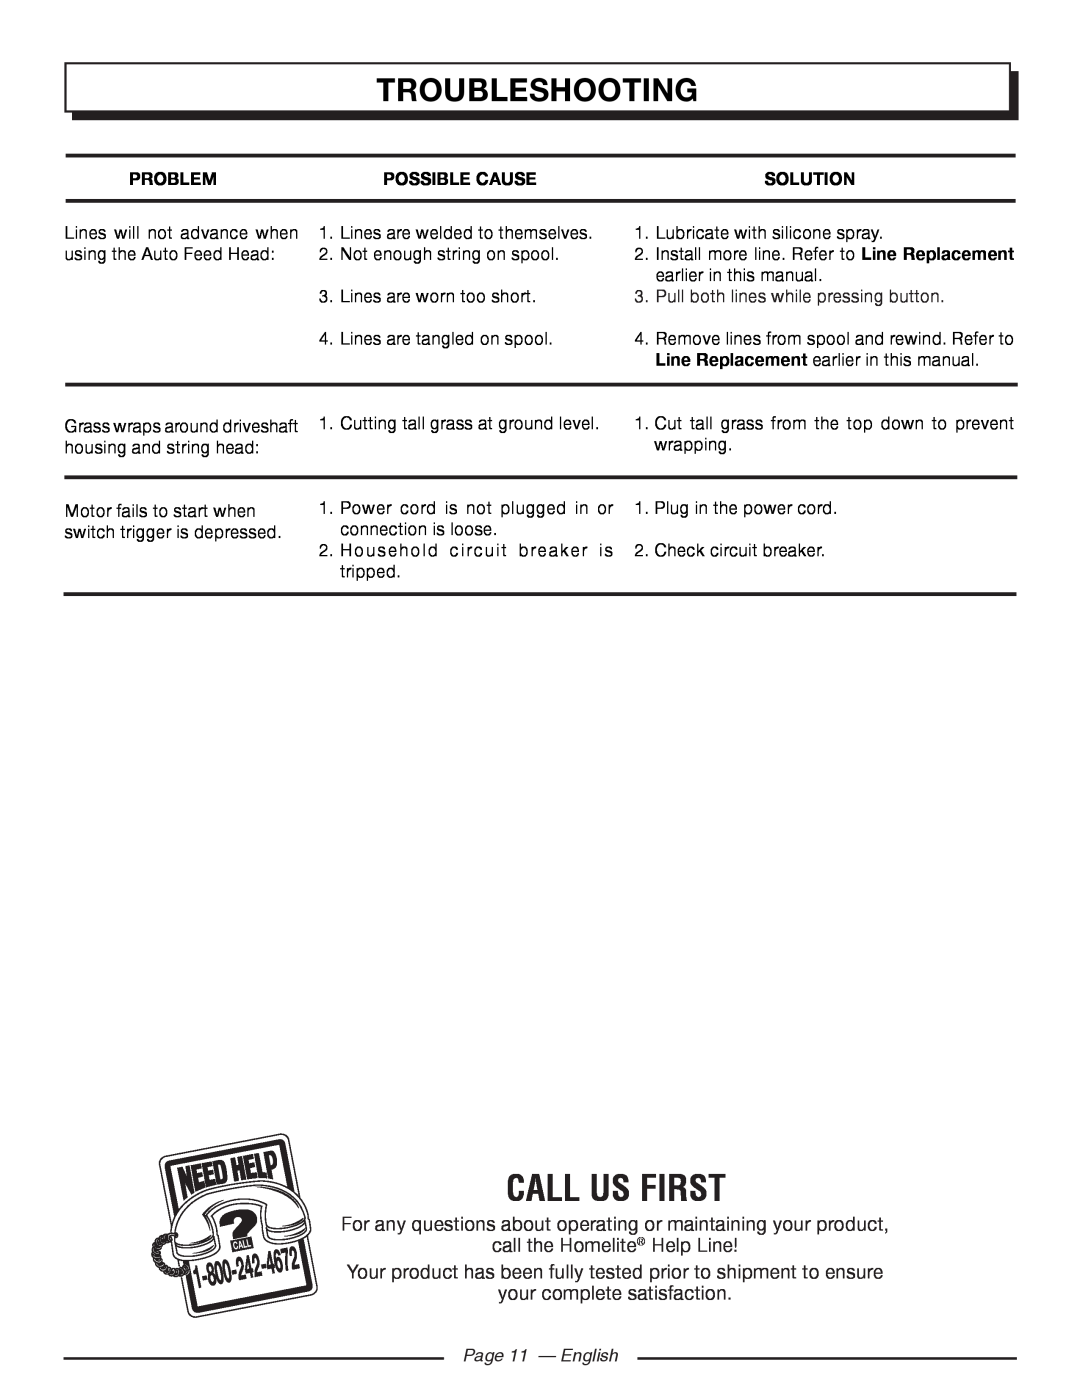 Homelite UT41112 manuel dutilisation Call Us First, Troubleshooting, Problem, Possible Cause, Solution, Page 11 - English 